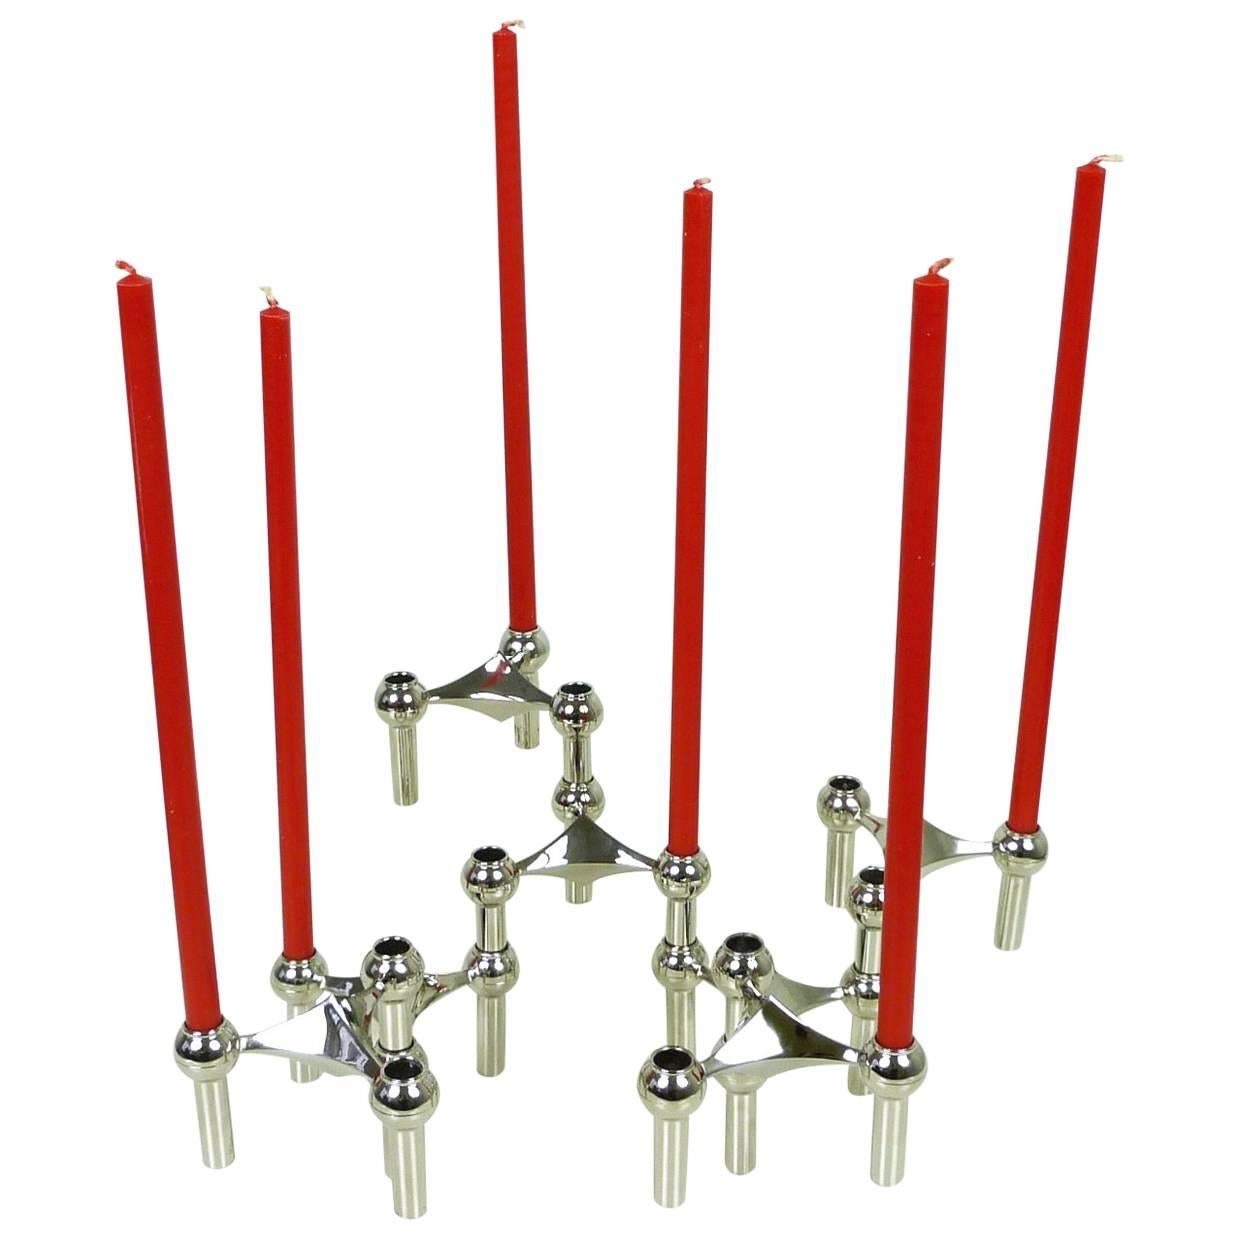 S22 Candlestick Holders with Table Candles from Fritz Nagel, Germany, 1960s For Sale